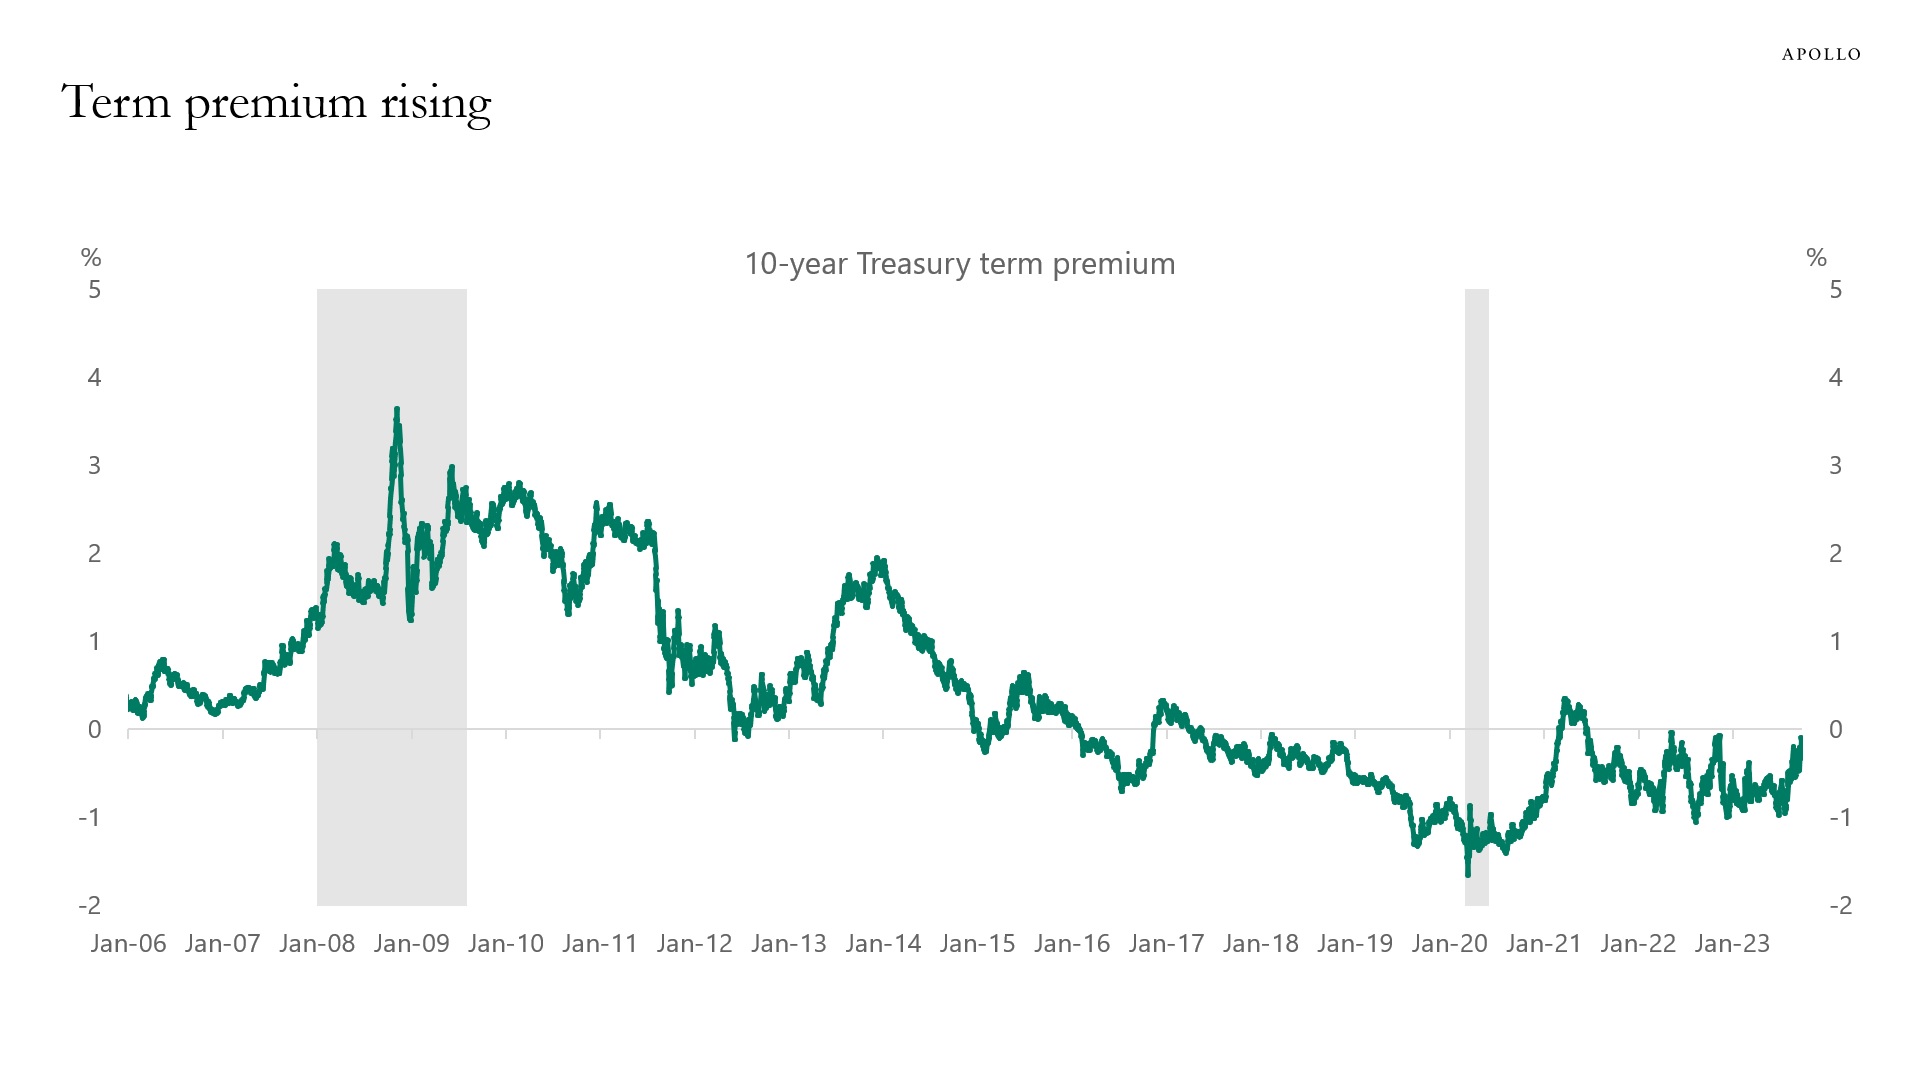 The 10-year T-bill's term premium is rising. 